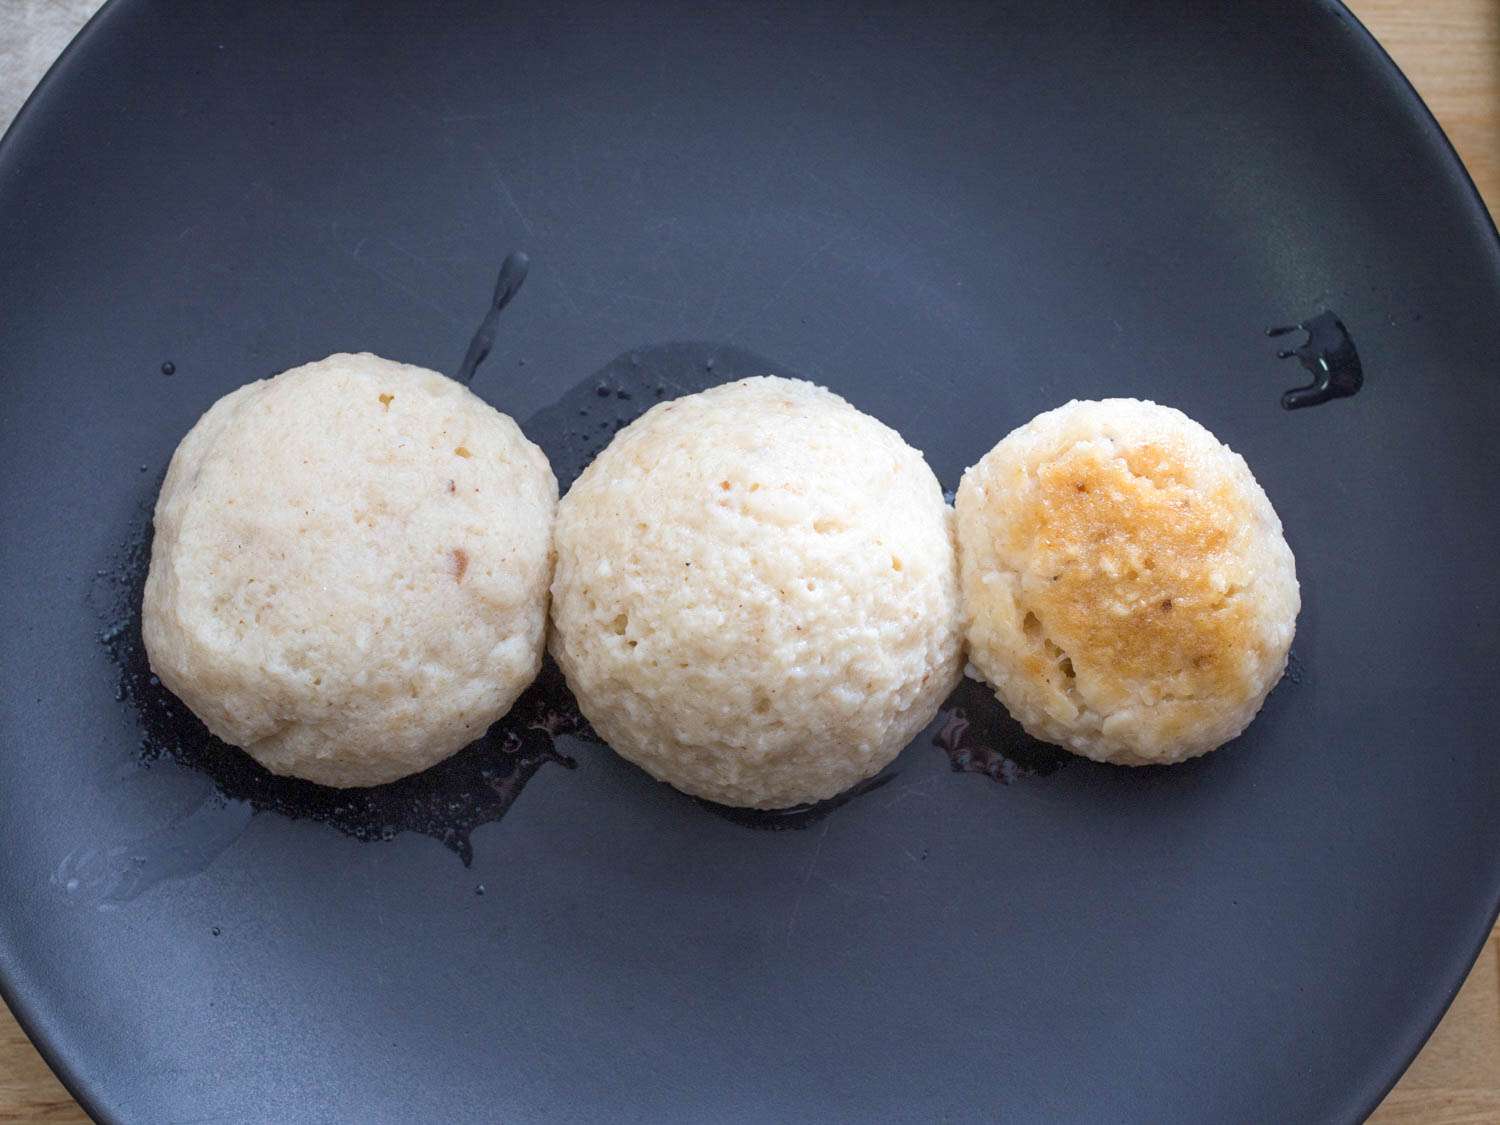 Three matzo balls. The one on the right is significantly smaller and a little discolored.